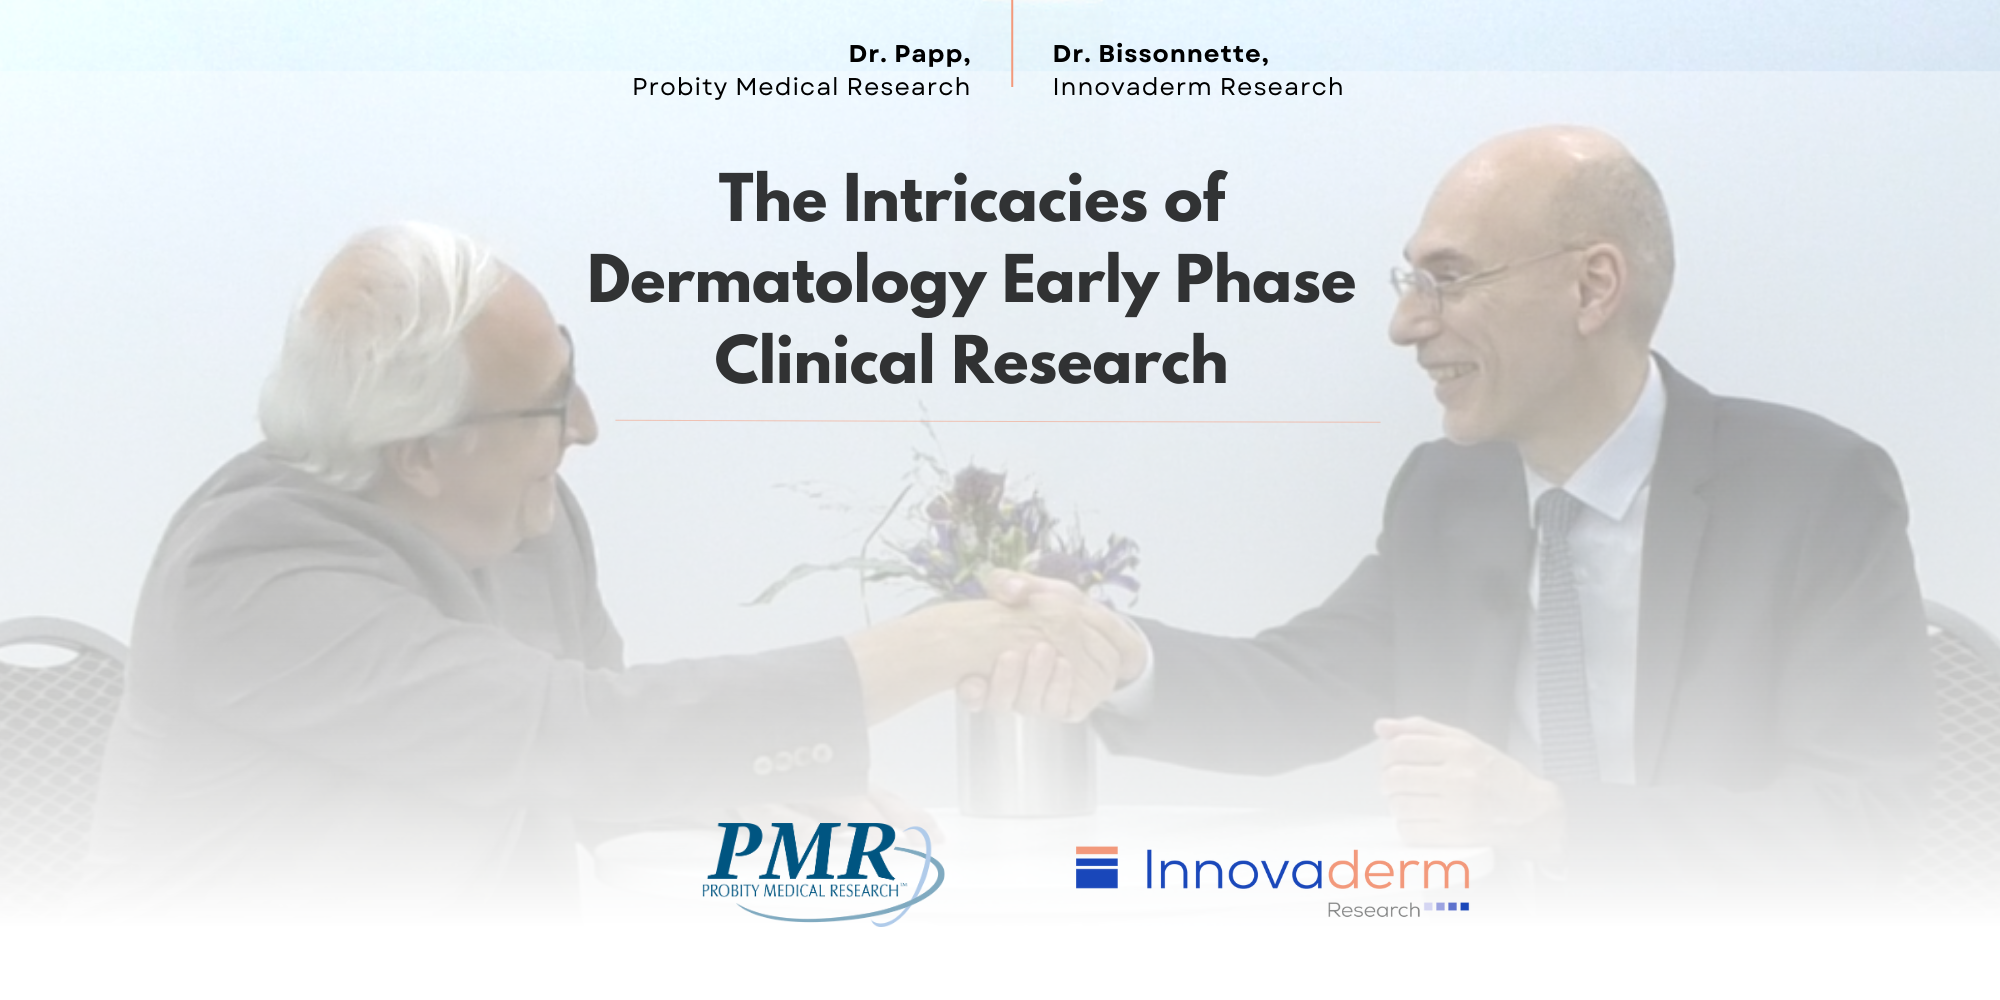 The Intricacies of Dermatology Early Phase Clinical Research